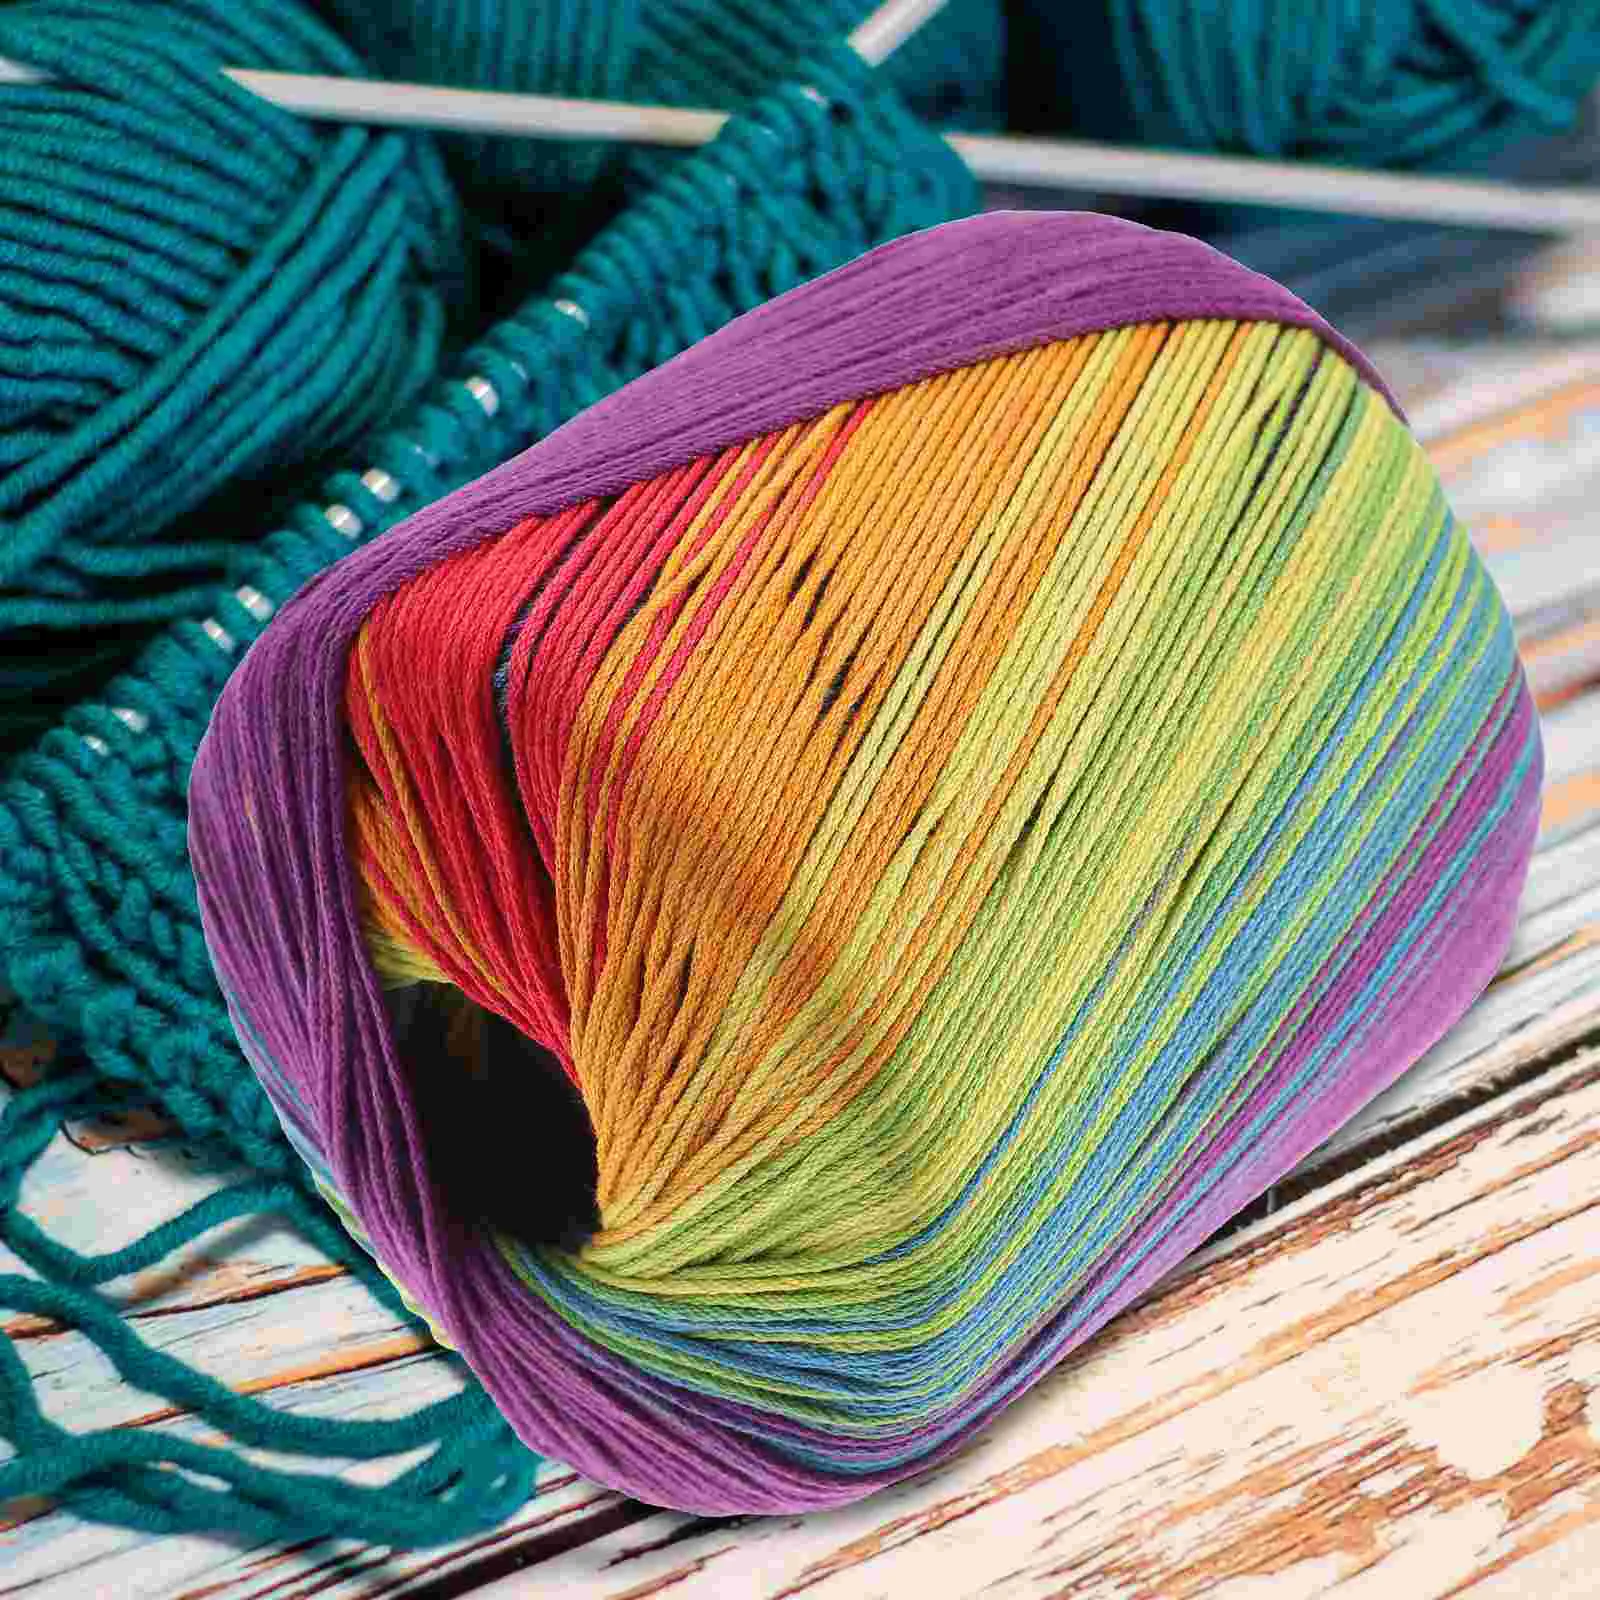 Buy Yarn in Bulk for Scarves, Hats and Blankets